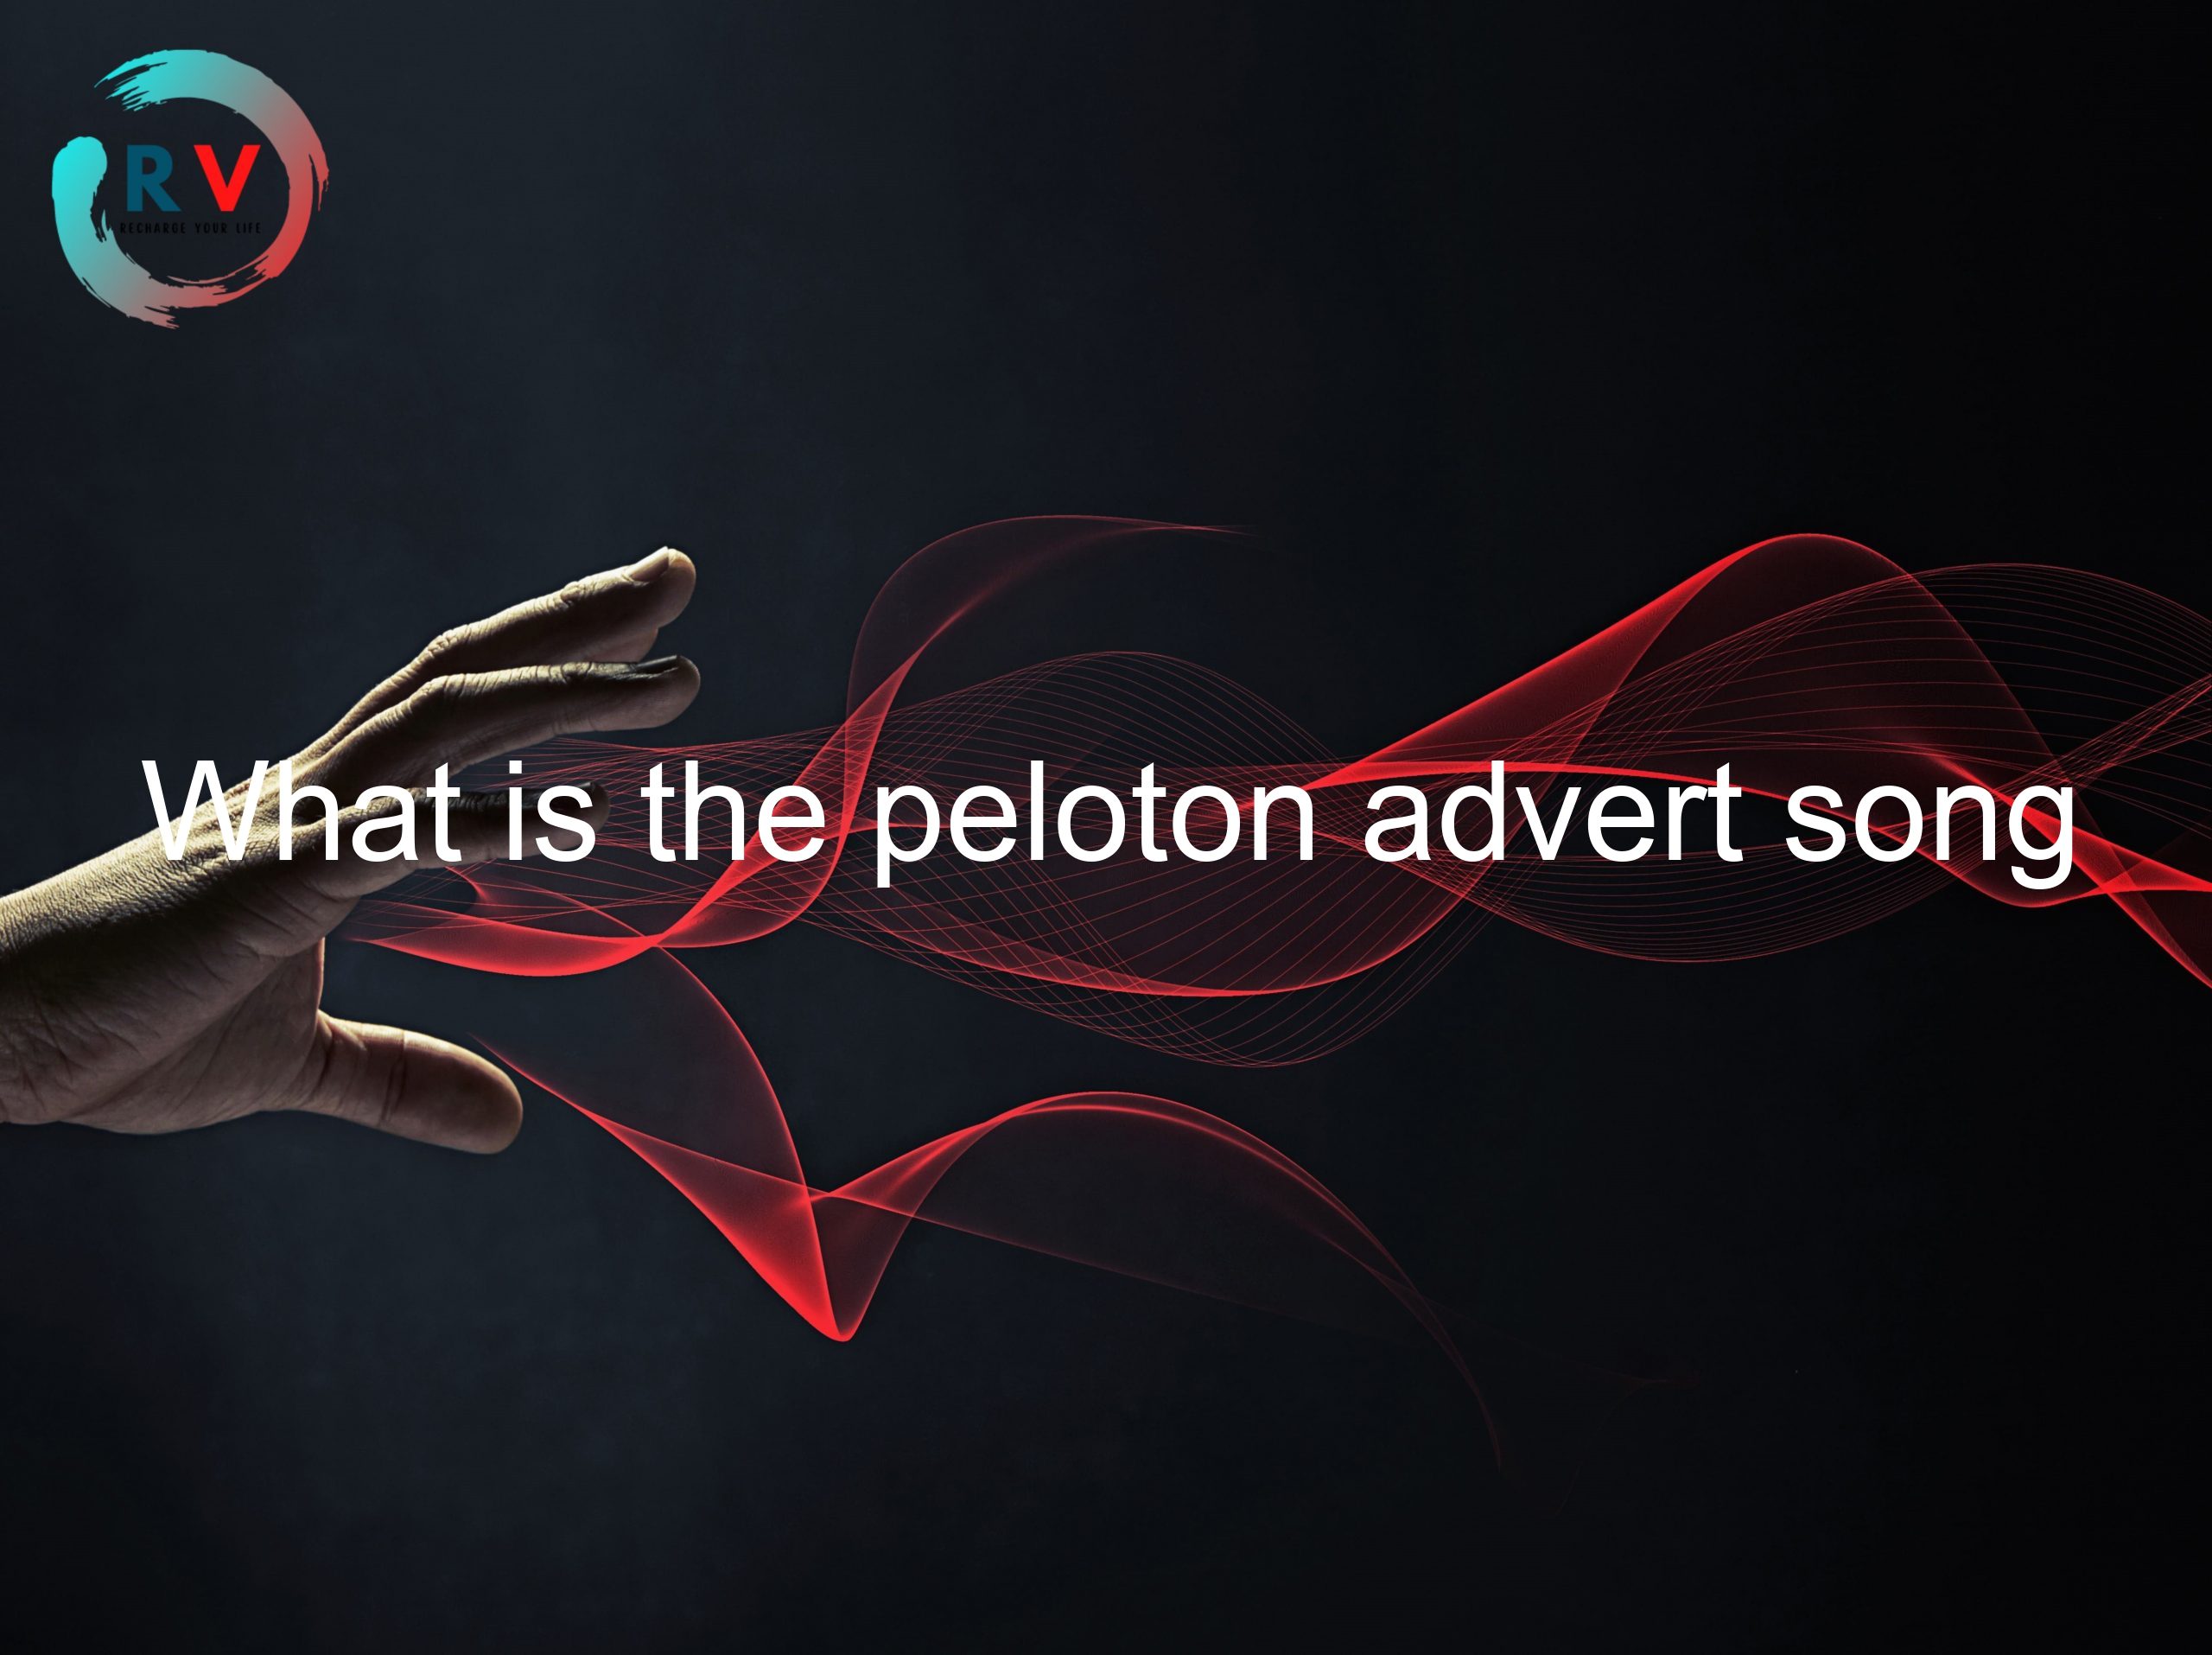 What is the peloton advert song